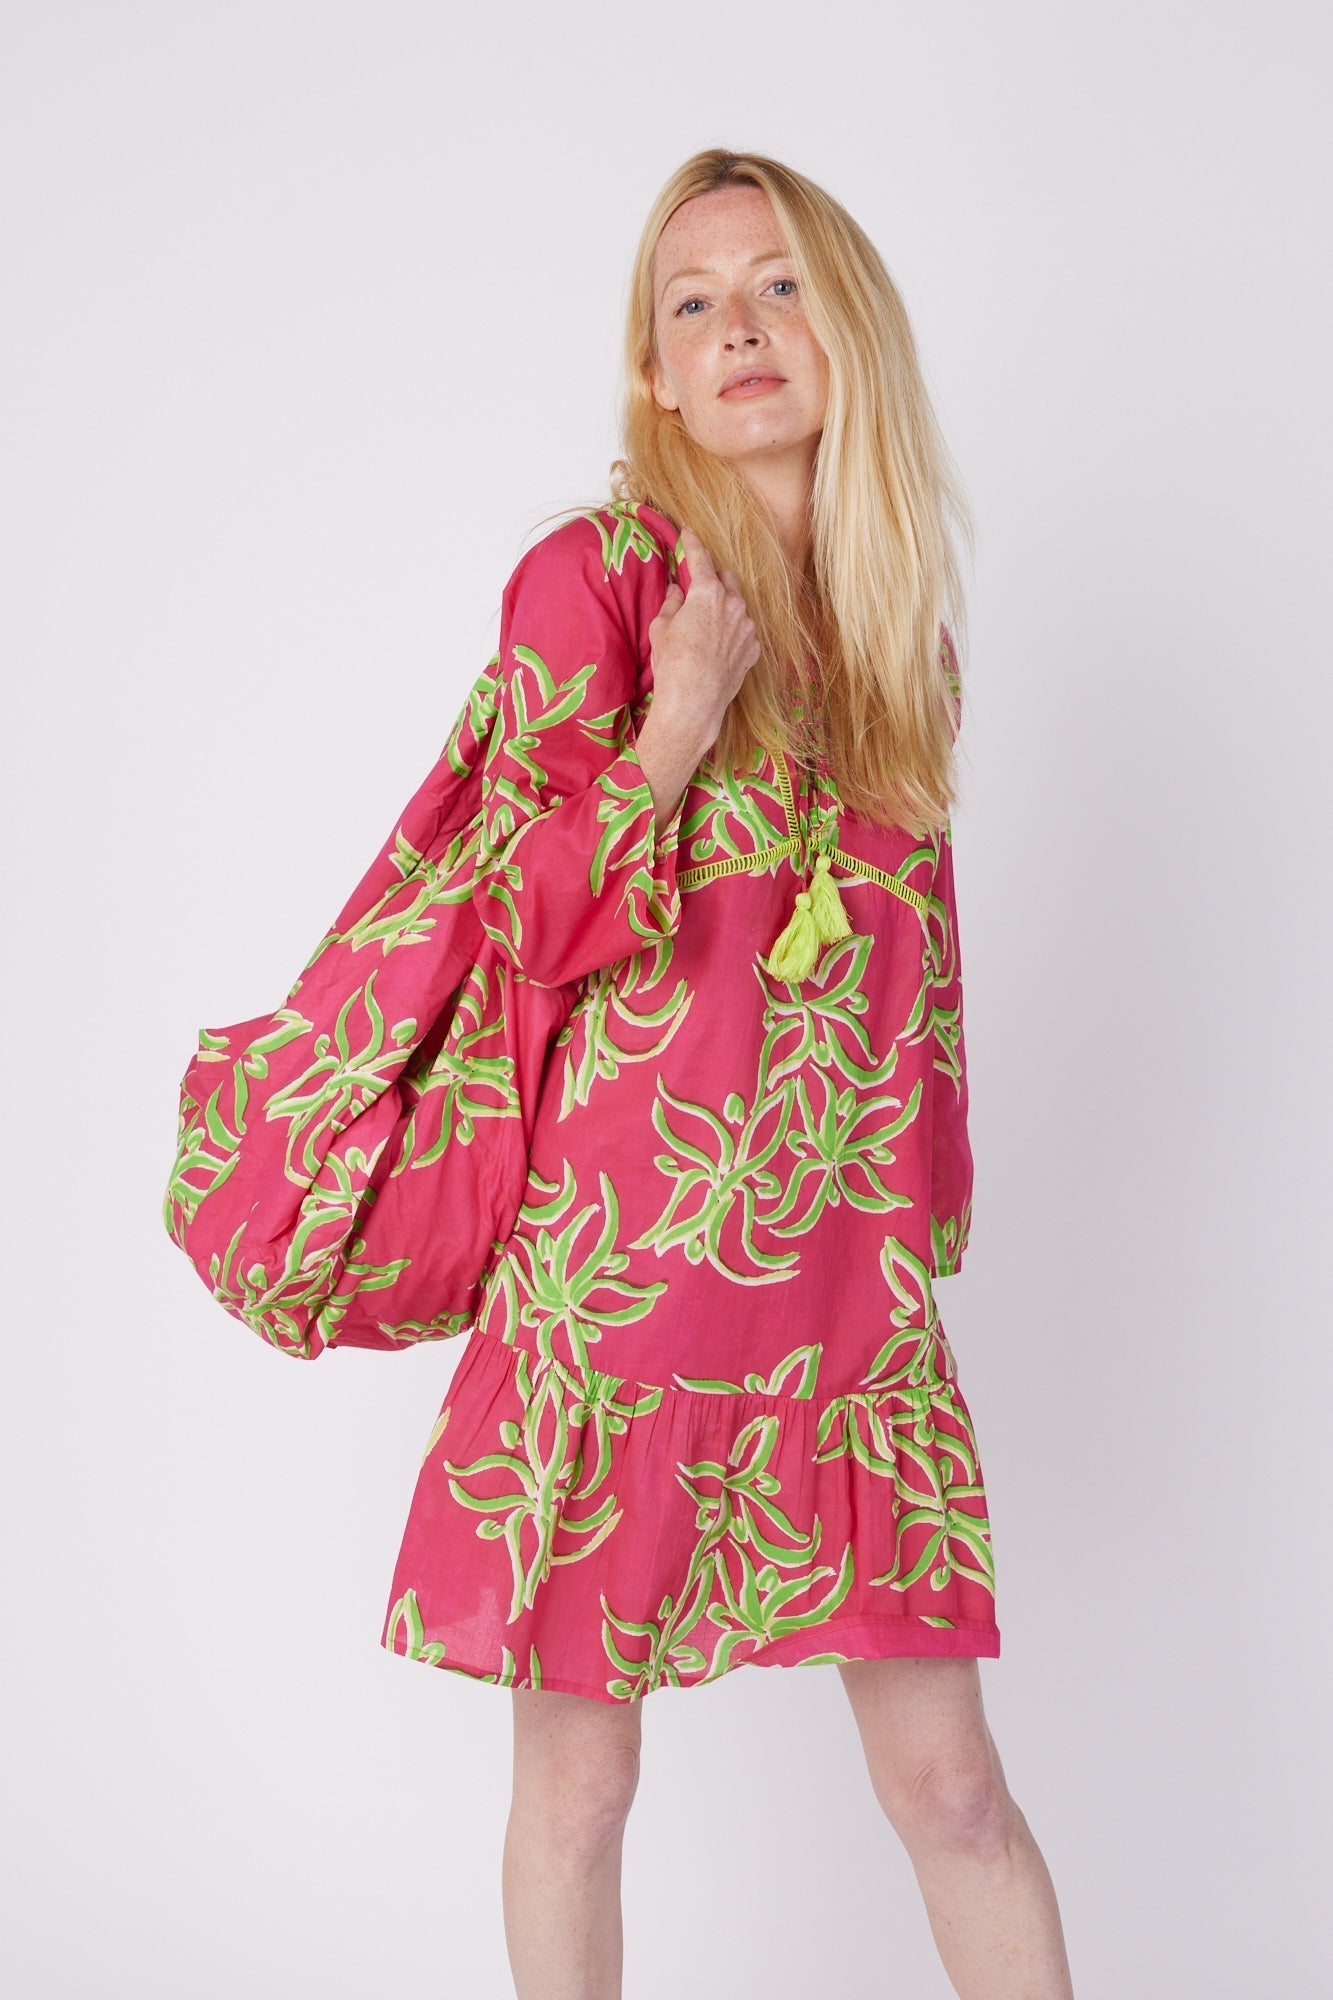 ModaPosa Brigida 3/4 Sleeve Ruffle Knee Length V-Neck Dress in Raspberry Lime Flower . Discover women's resort dresses and lifestyle clothing inspired by the Mediterranean. Free worldwide shipping available!